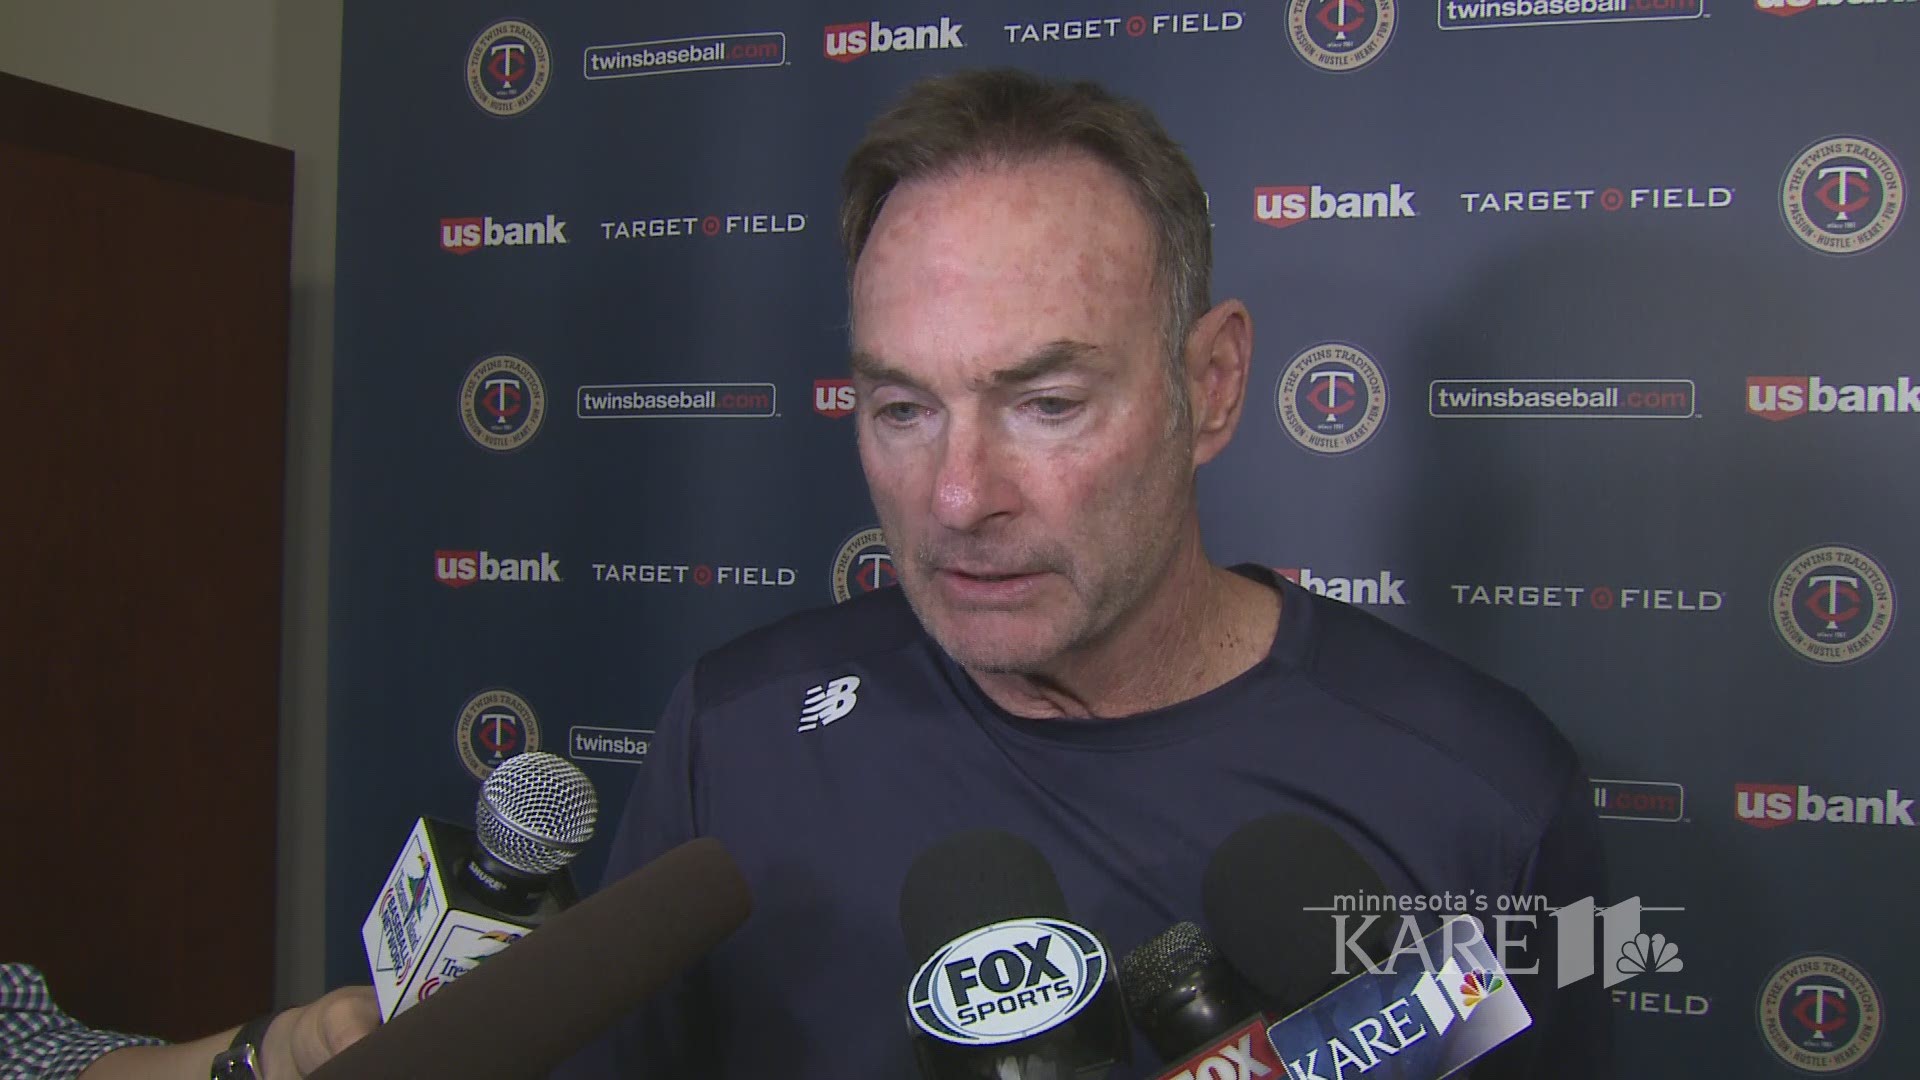 Paul Molitor, Brian Dozier, and Joe Mauer discuss their big comeback win over Toronto Sunday afternoon...as well as their trip to the Big Apple this week.